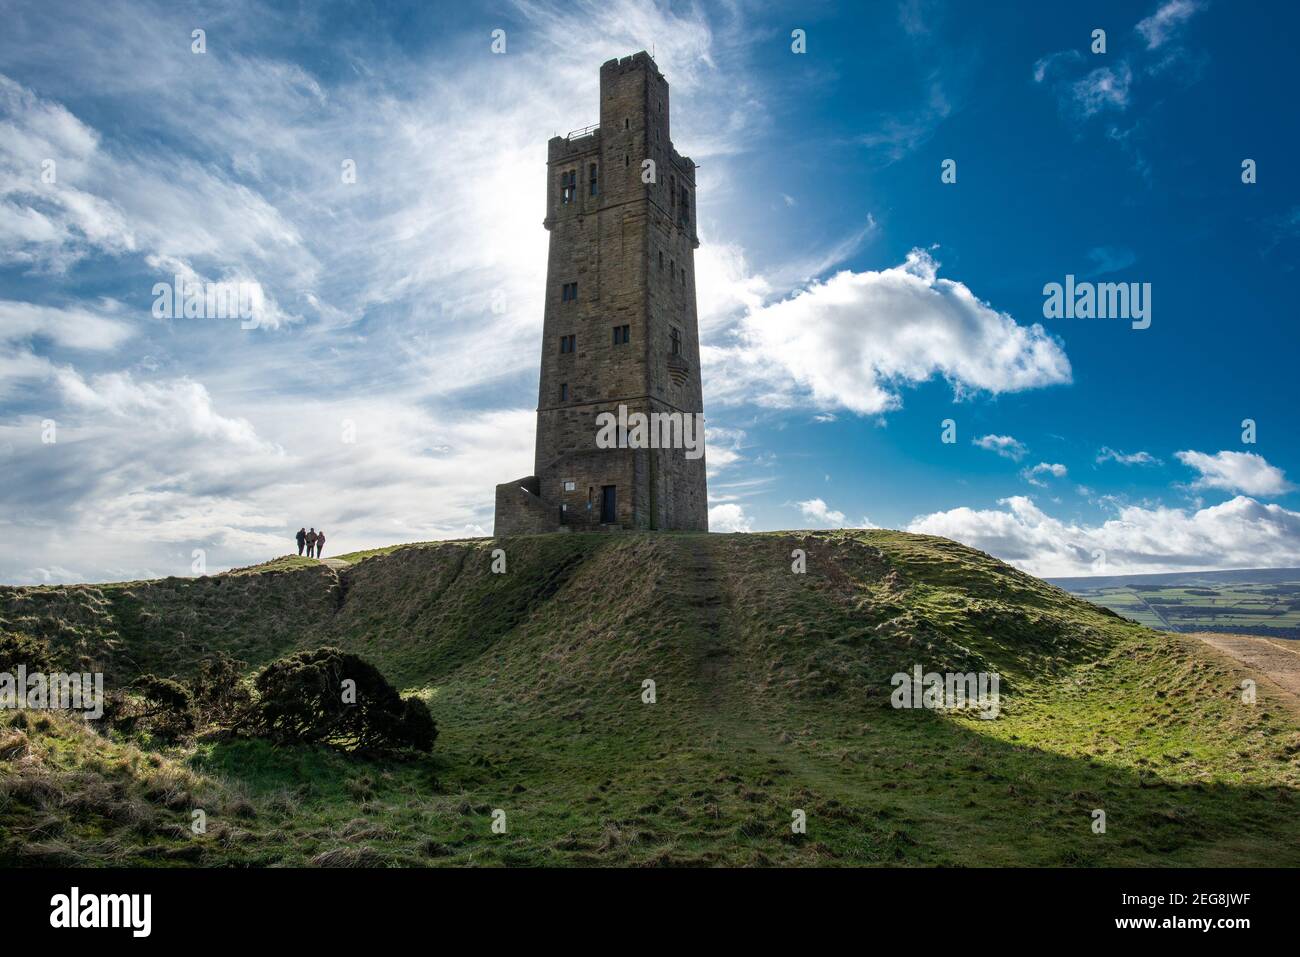 Huddersfield, West Yorkshire, UK. 18th Feb, 2021. A lovely day at Castle Hill, Almondbury, overlooking Huddersfield, West Yorkshire. Credit: John Eveson/Alamy Live News Stock Photo